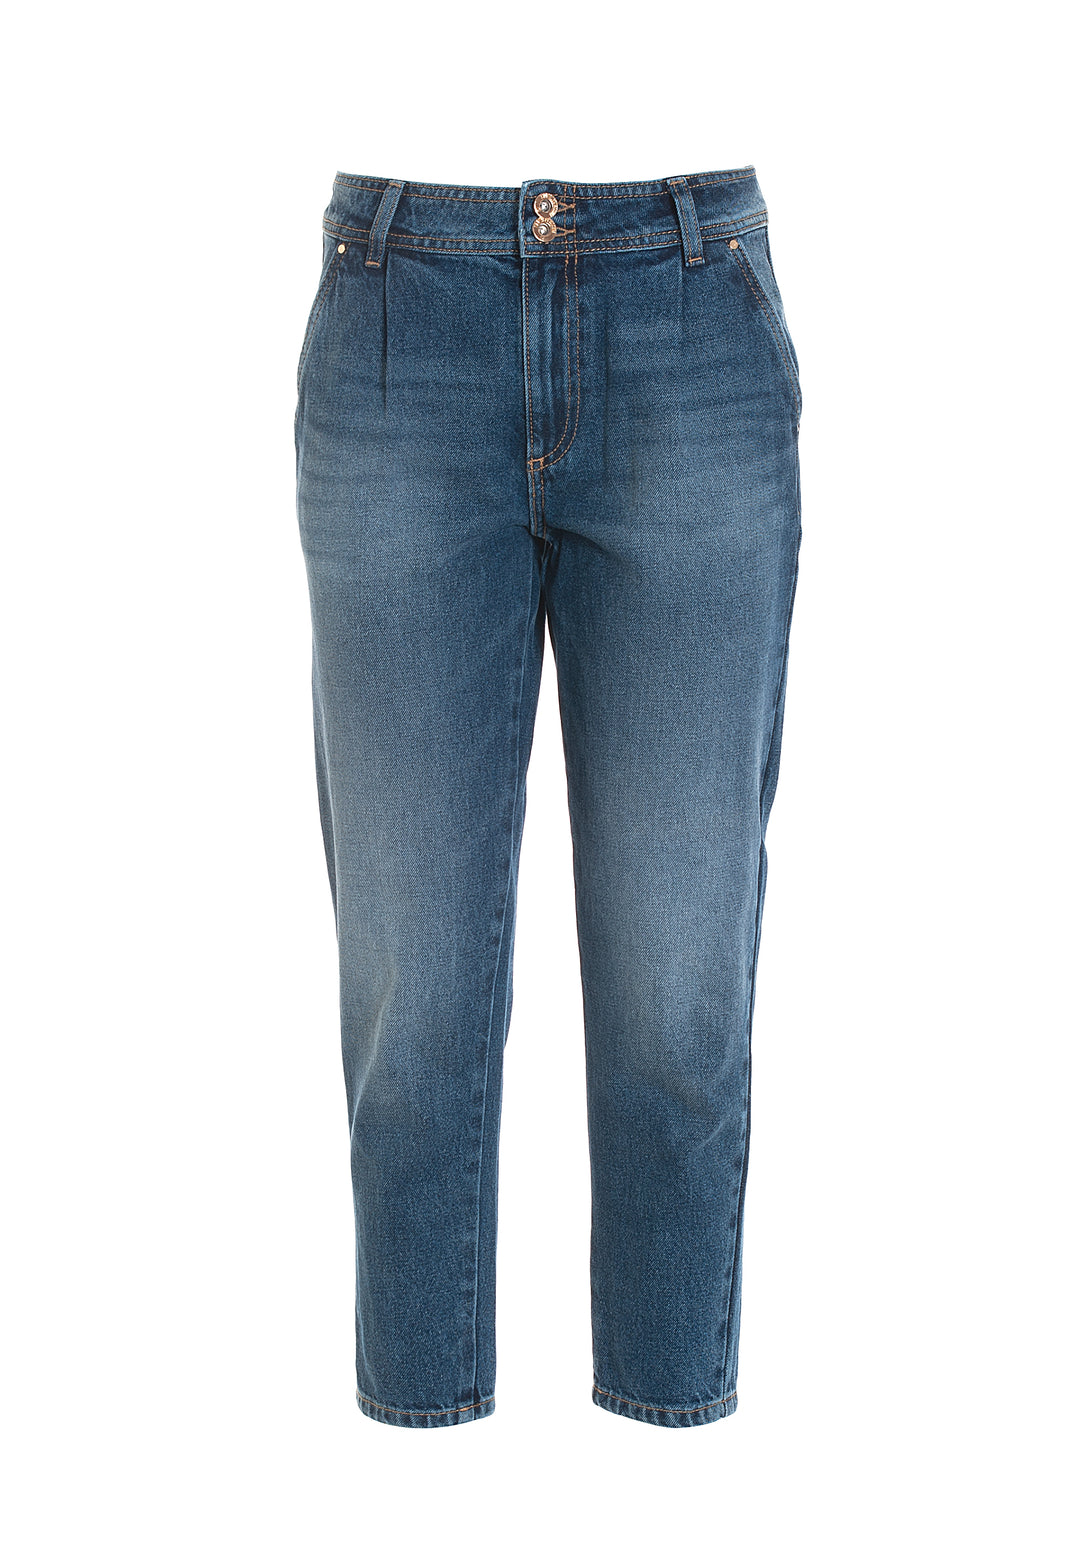 Chinos jeans regular fit made in denim with middle wash